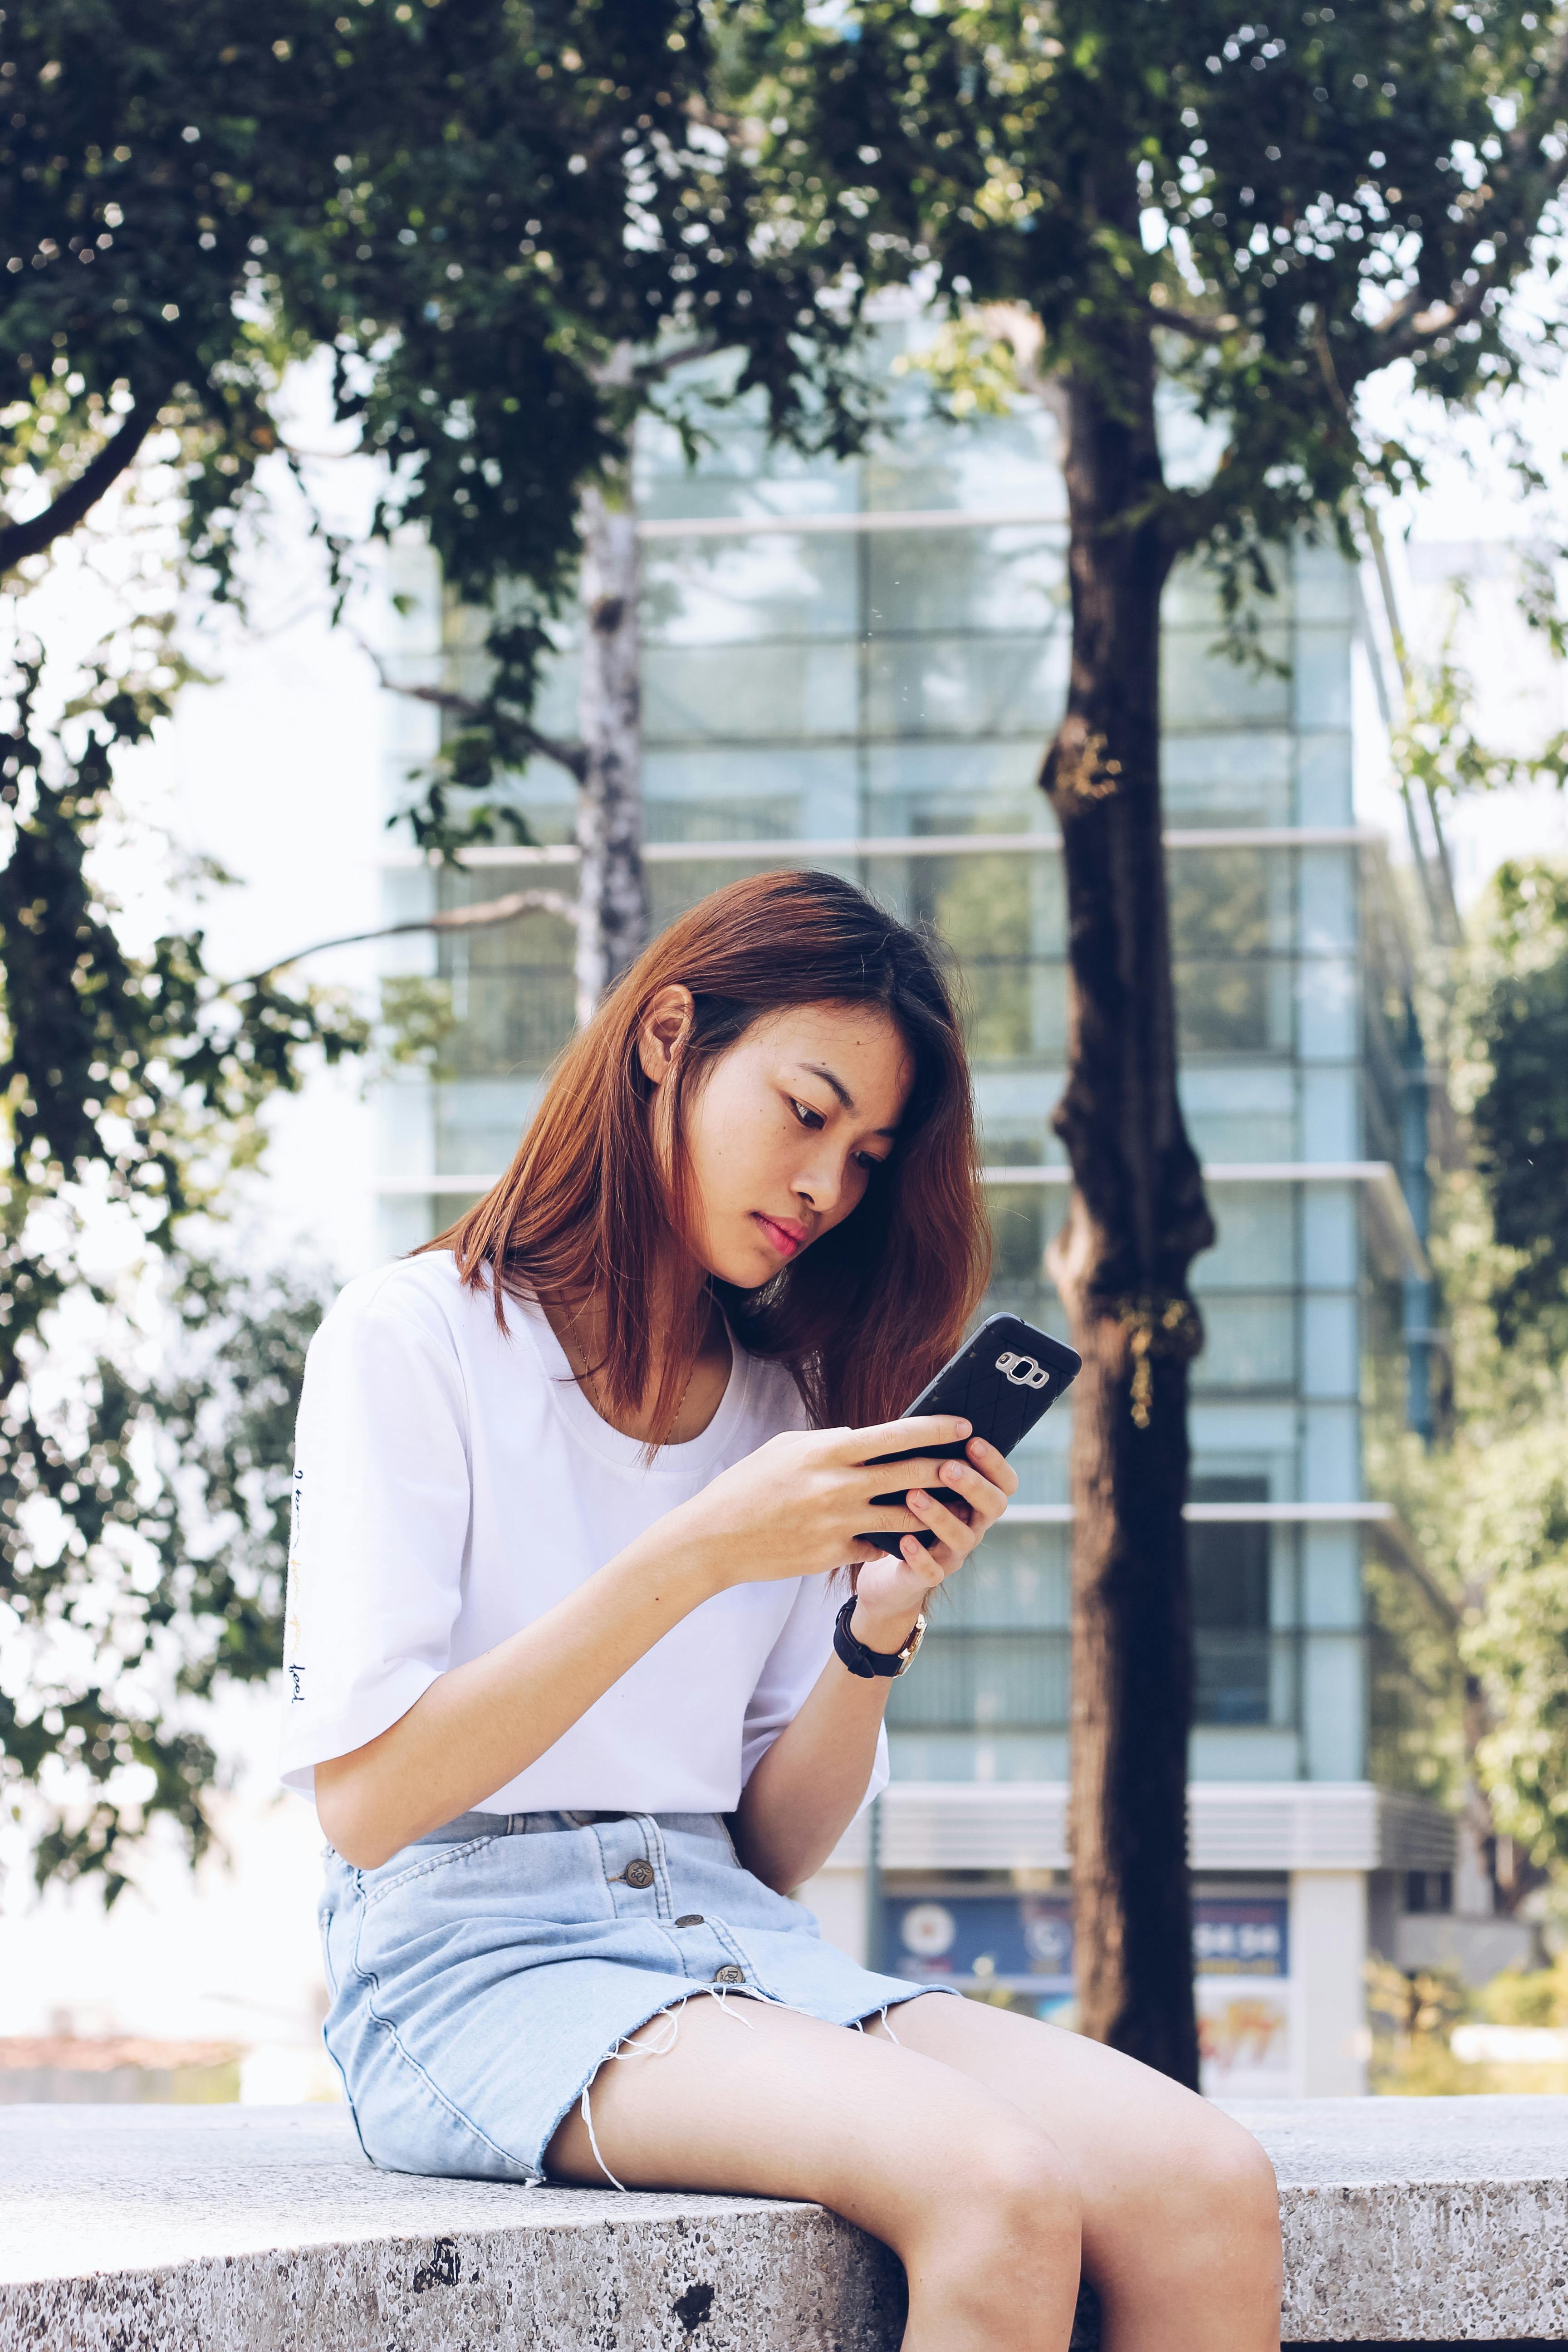 Woman Using Her Phone While Sitting on Concrete Bench